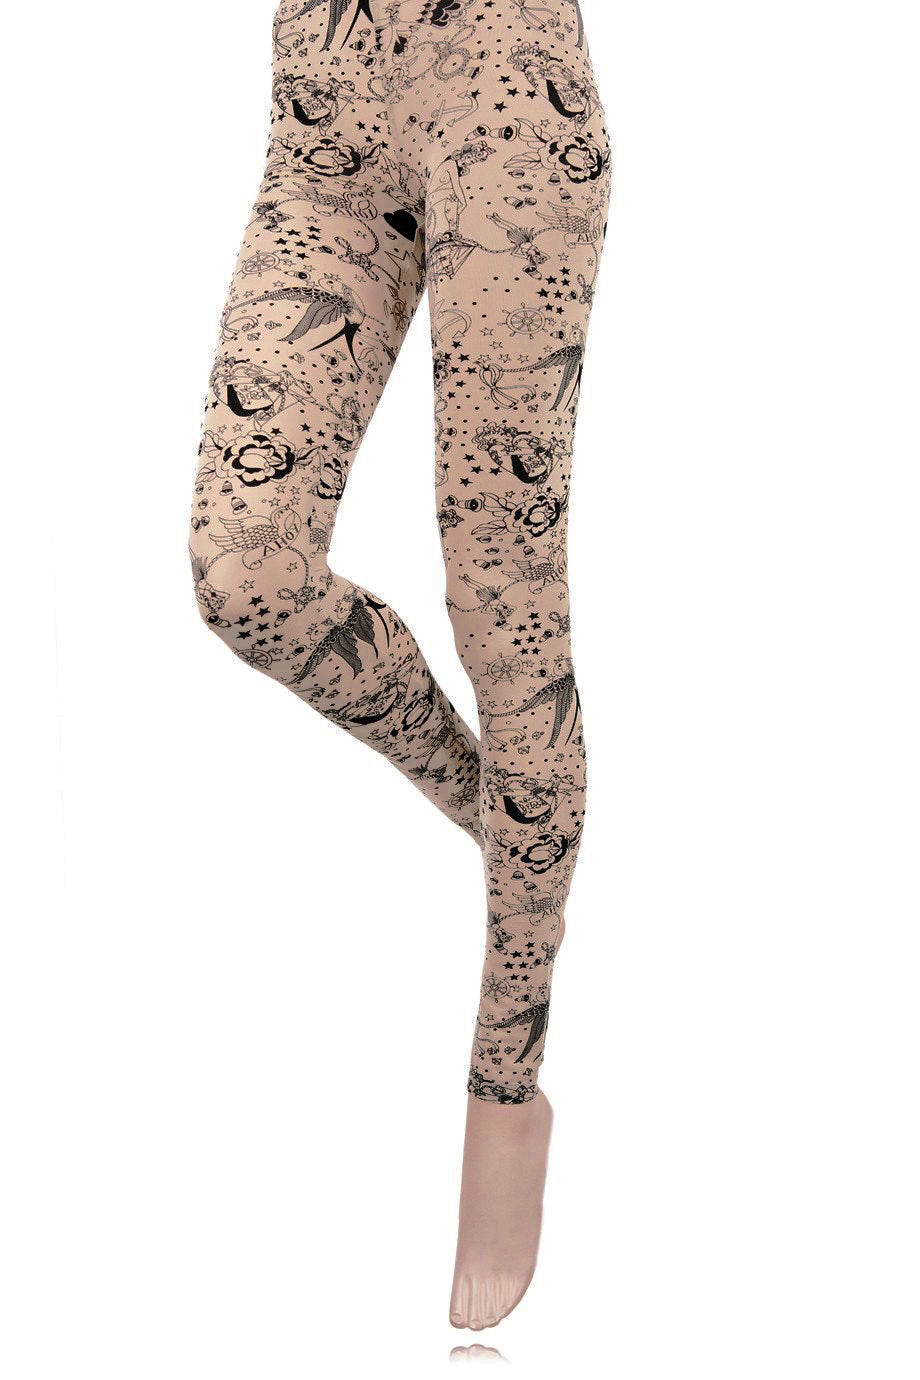 AHOY Tights with Tattoo design